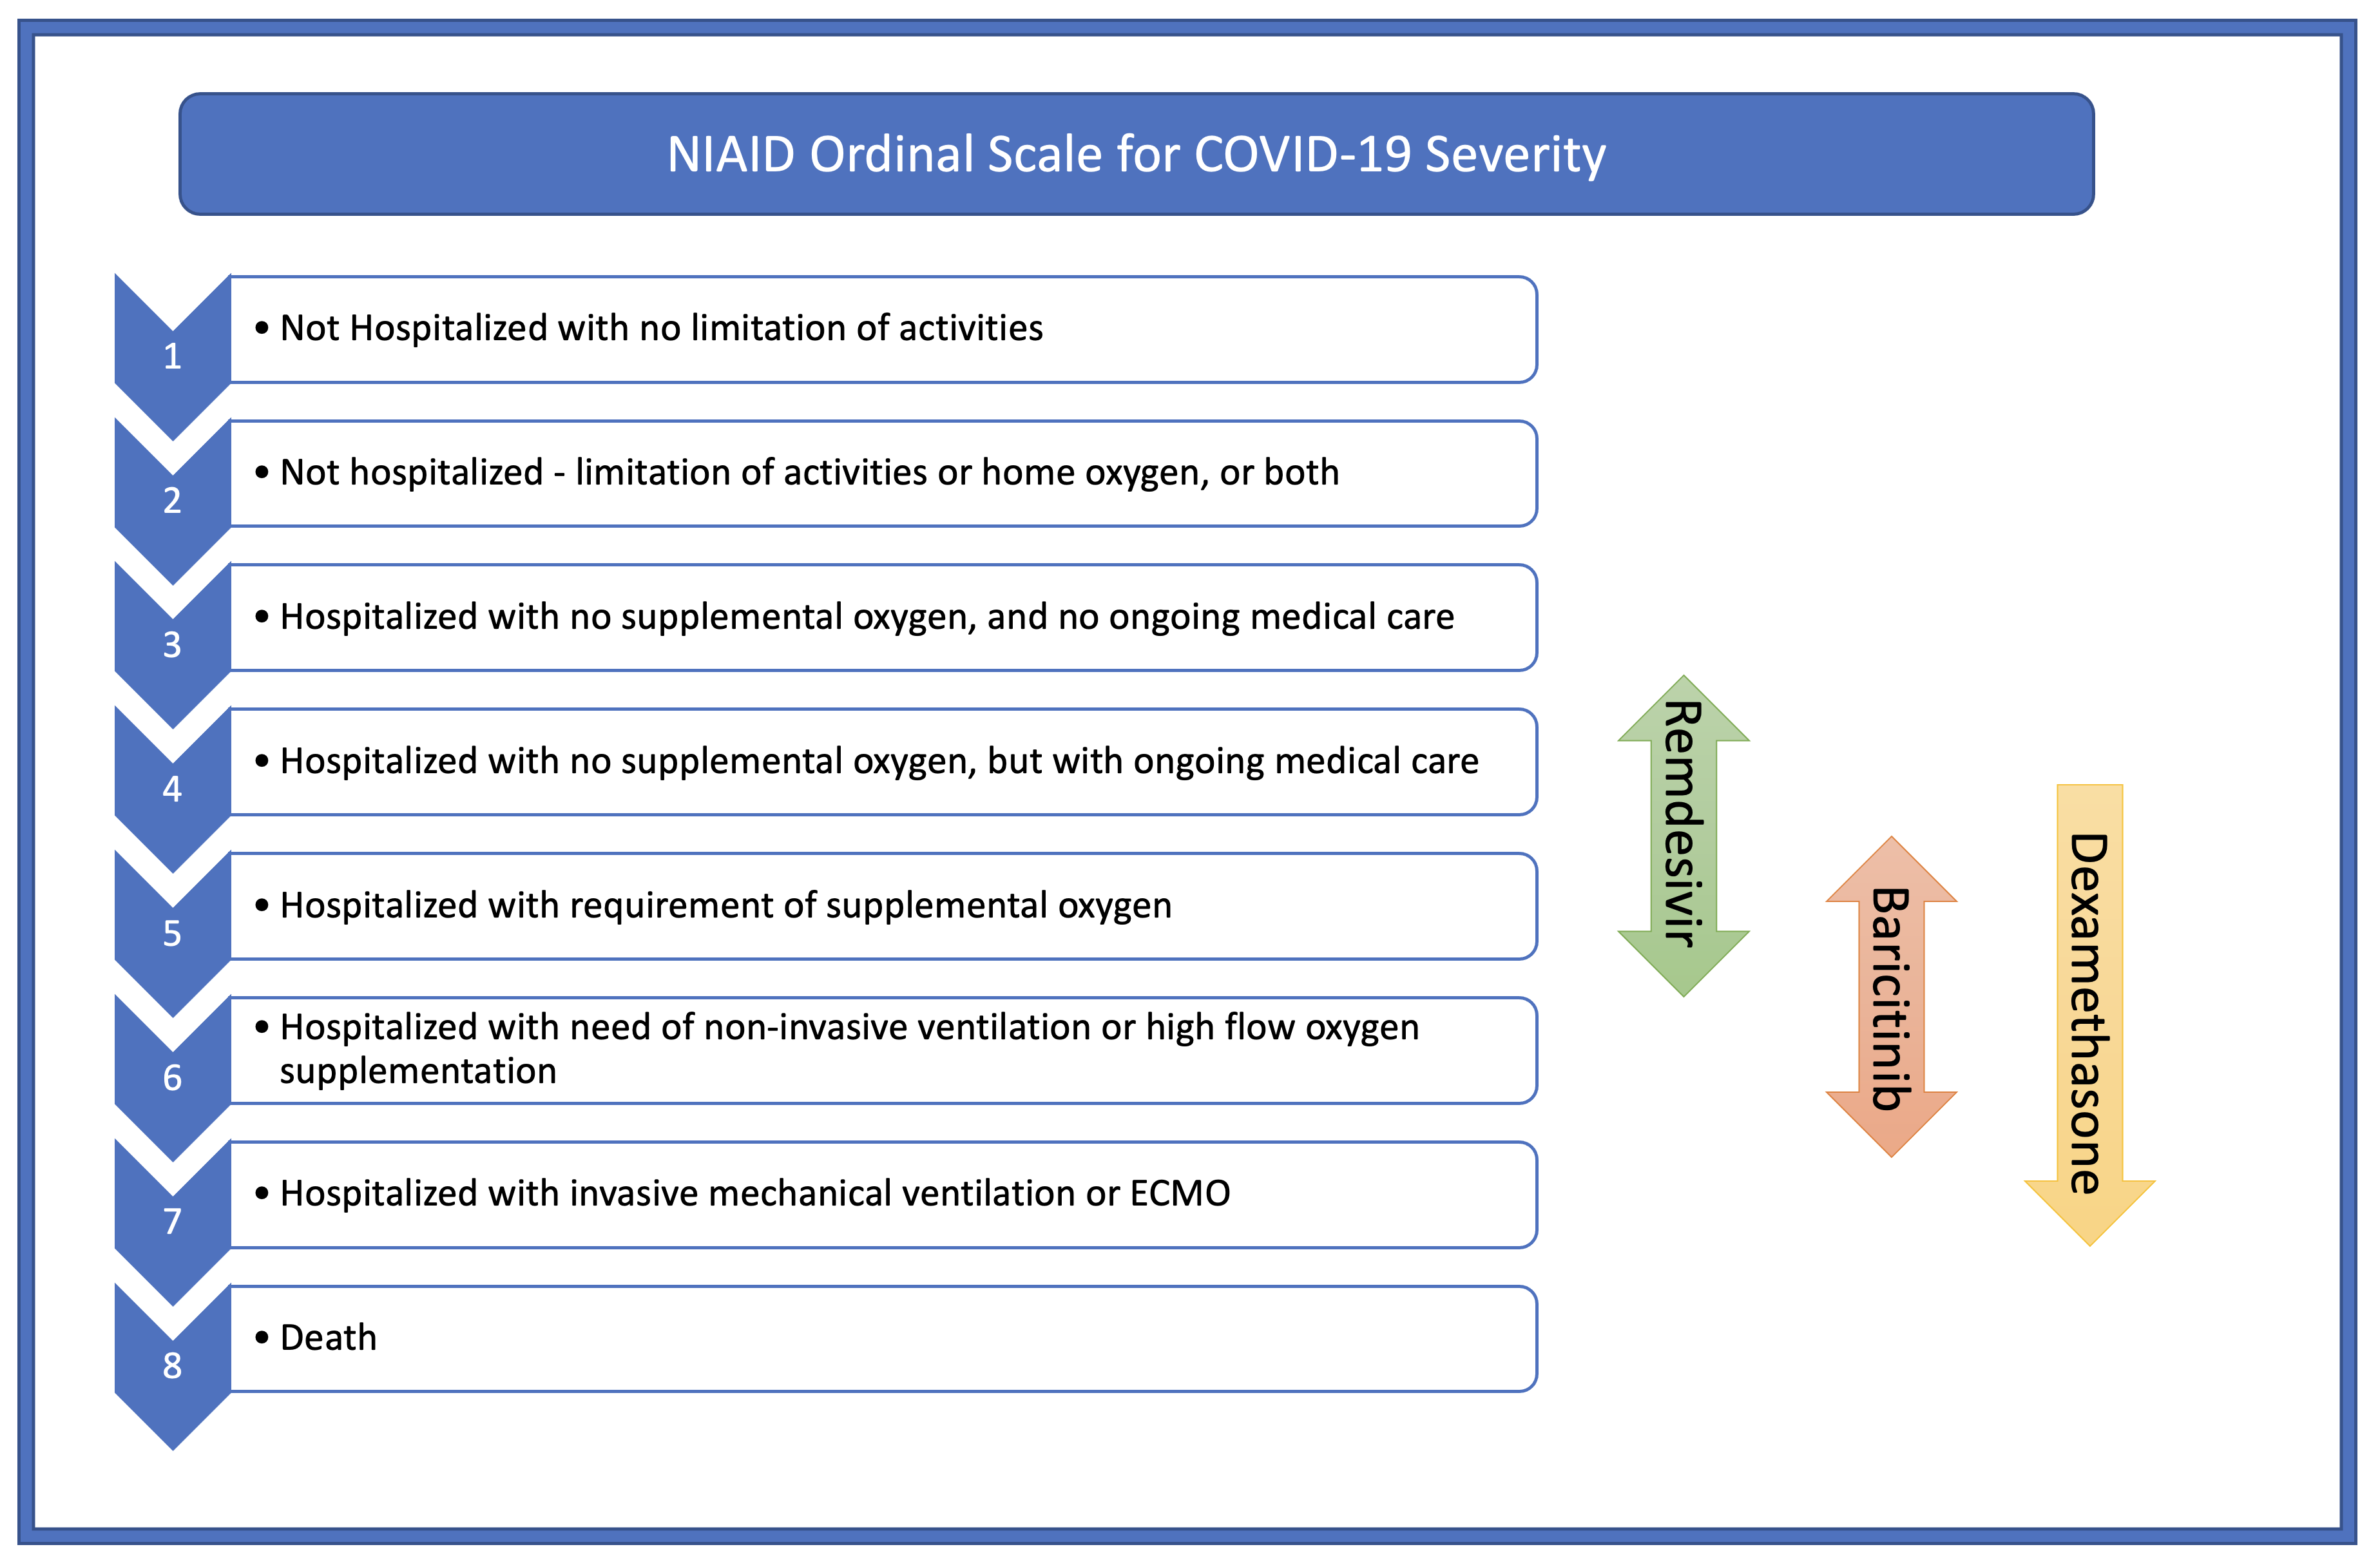 NIAID Ordinal Scale for COVID-19 severity with indications for Dexamethasone, Baricitinib and Remdesivir.